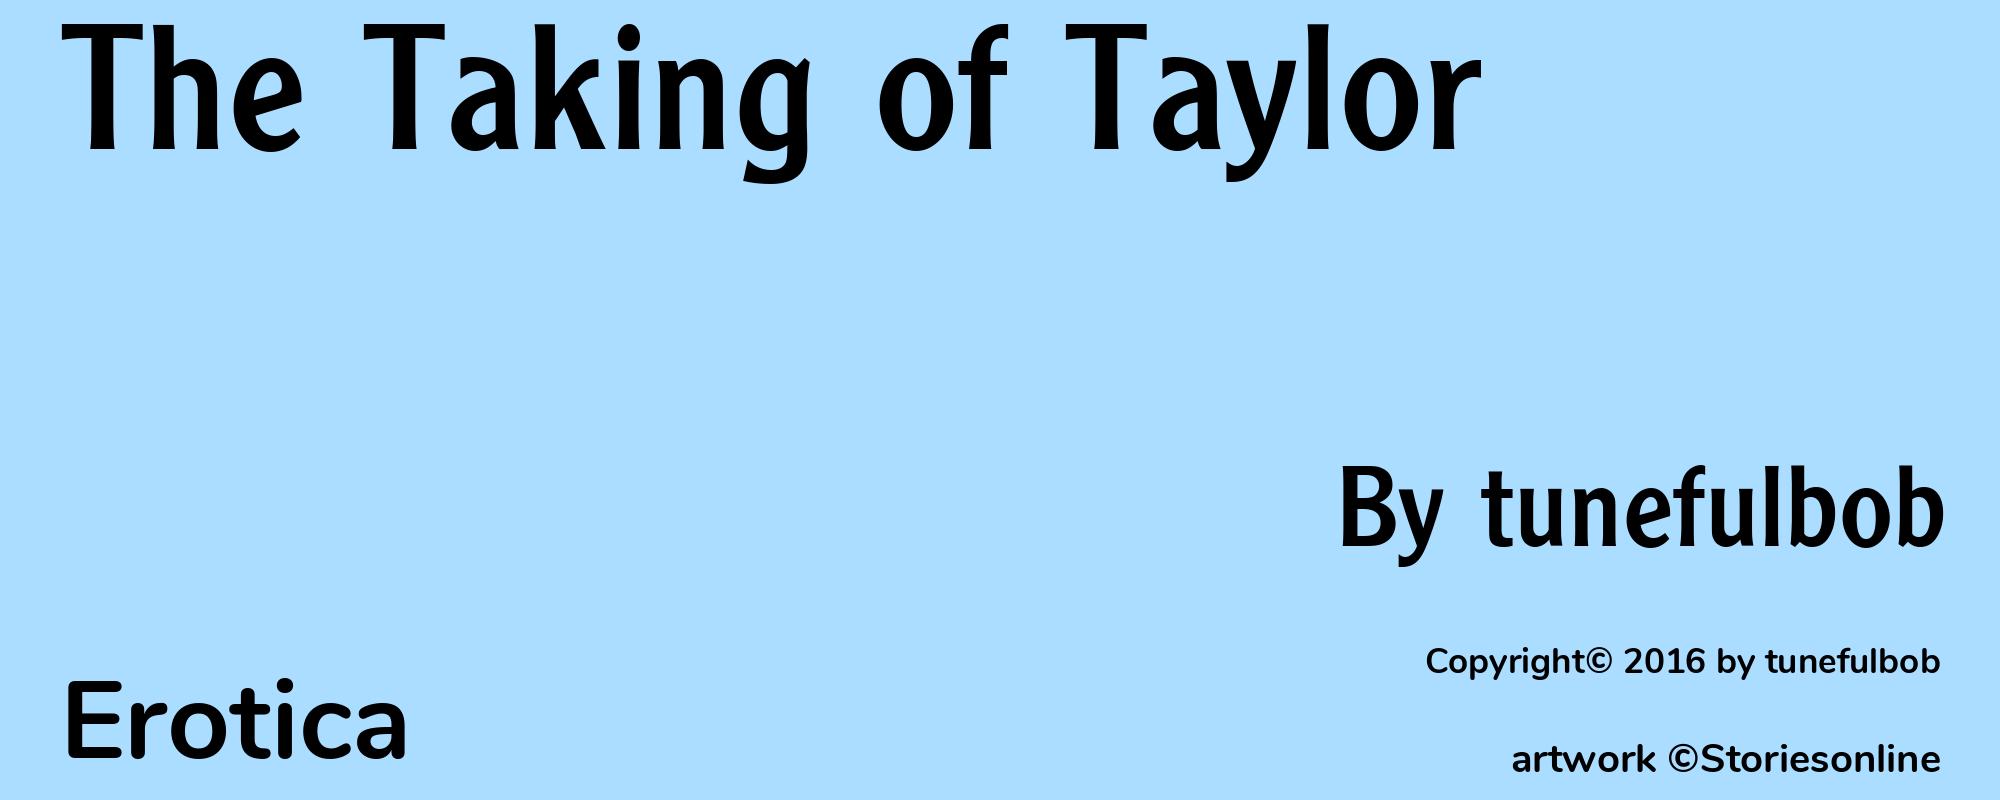 The Taking of Taylor - Cover